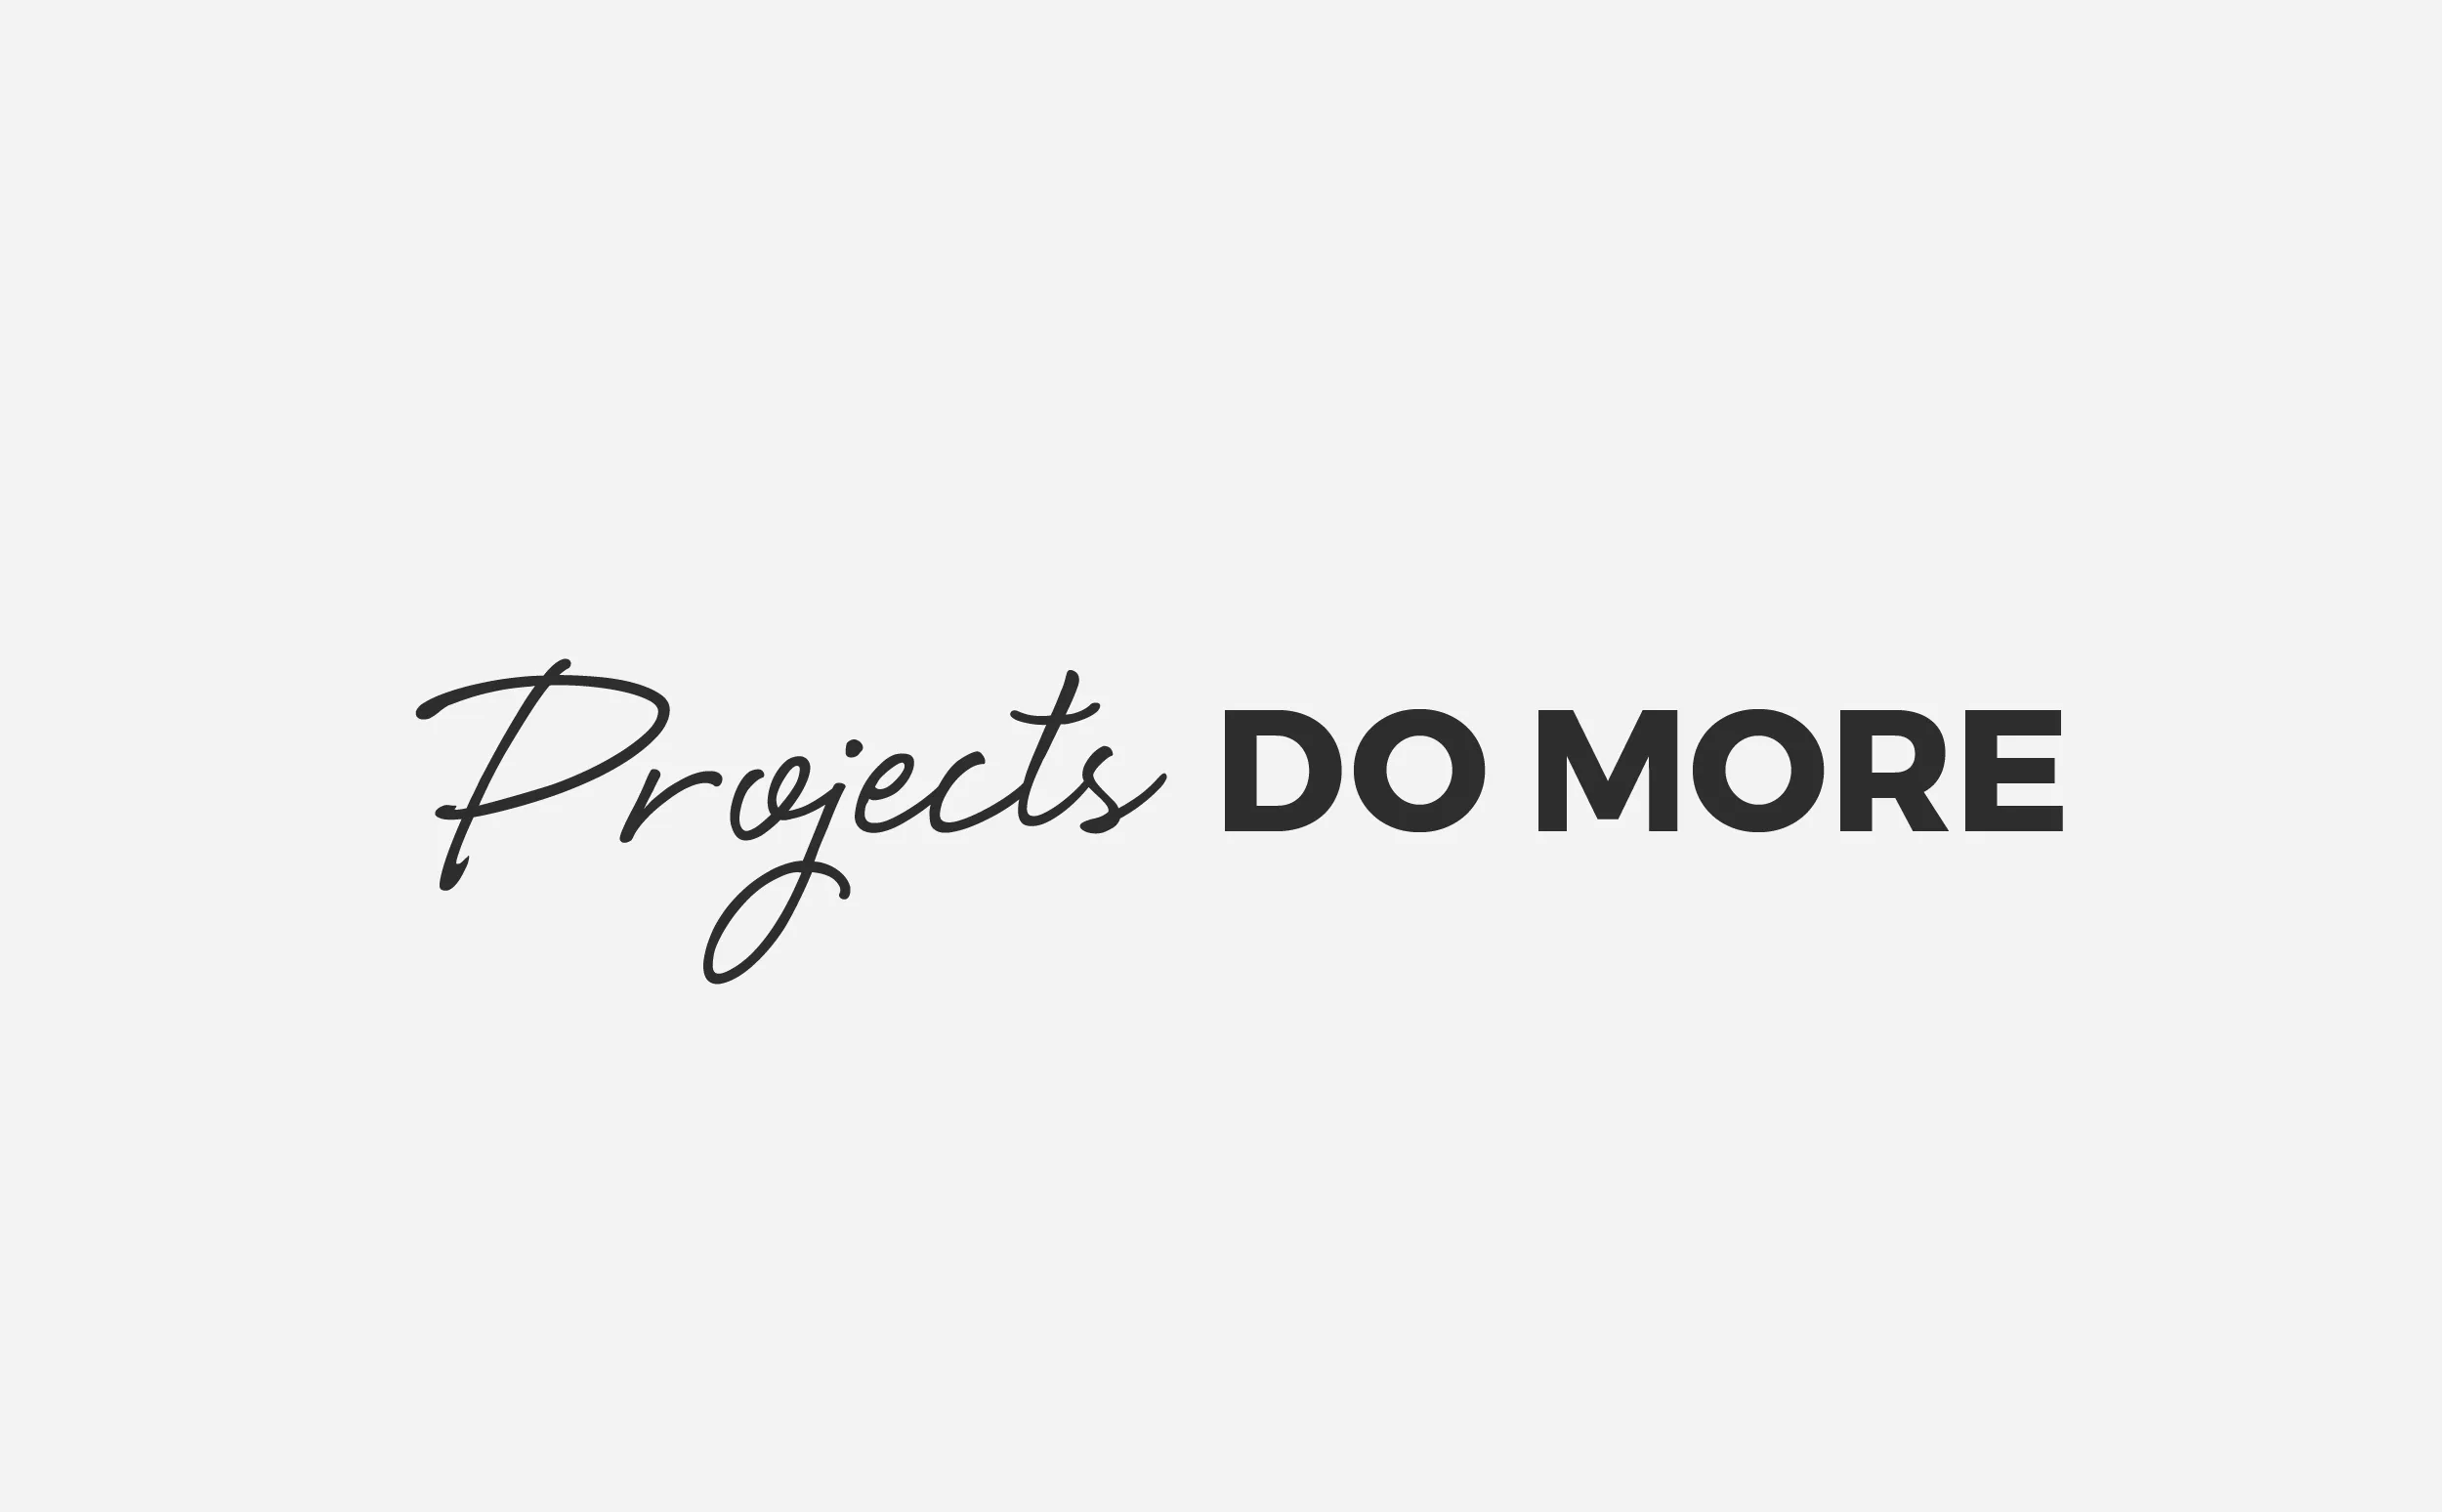 The Great Projects - Do more strapline by Peek Creative Limited